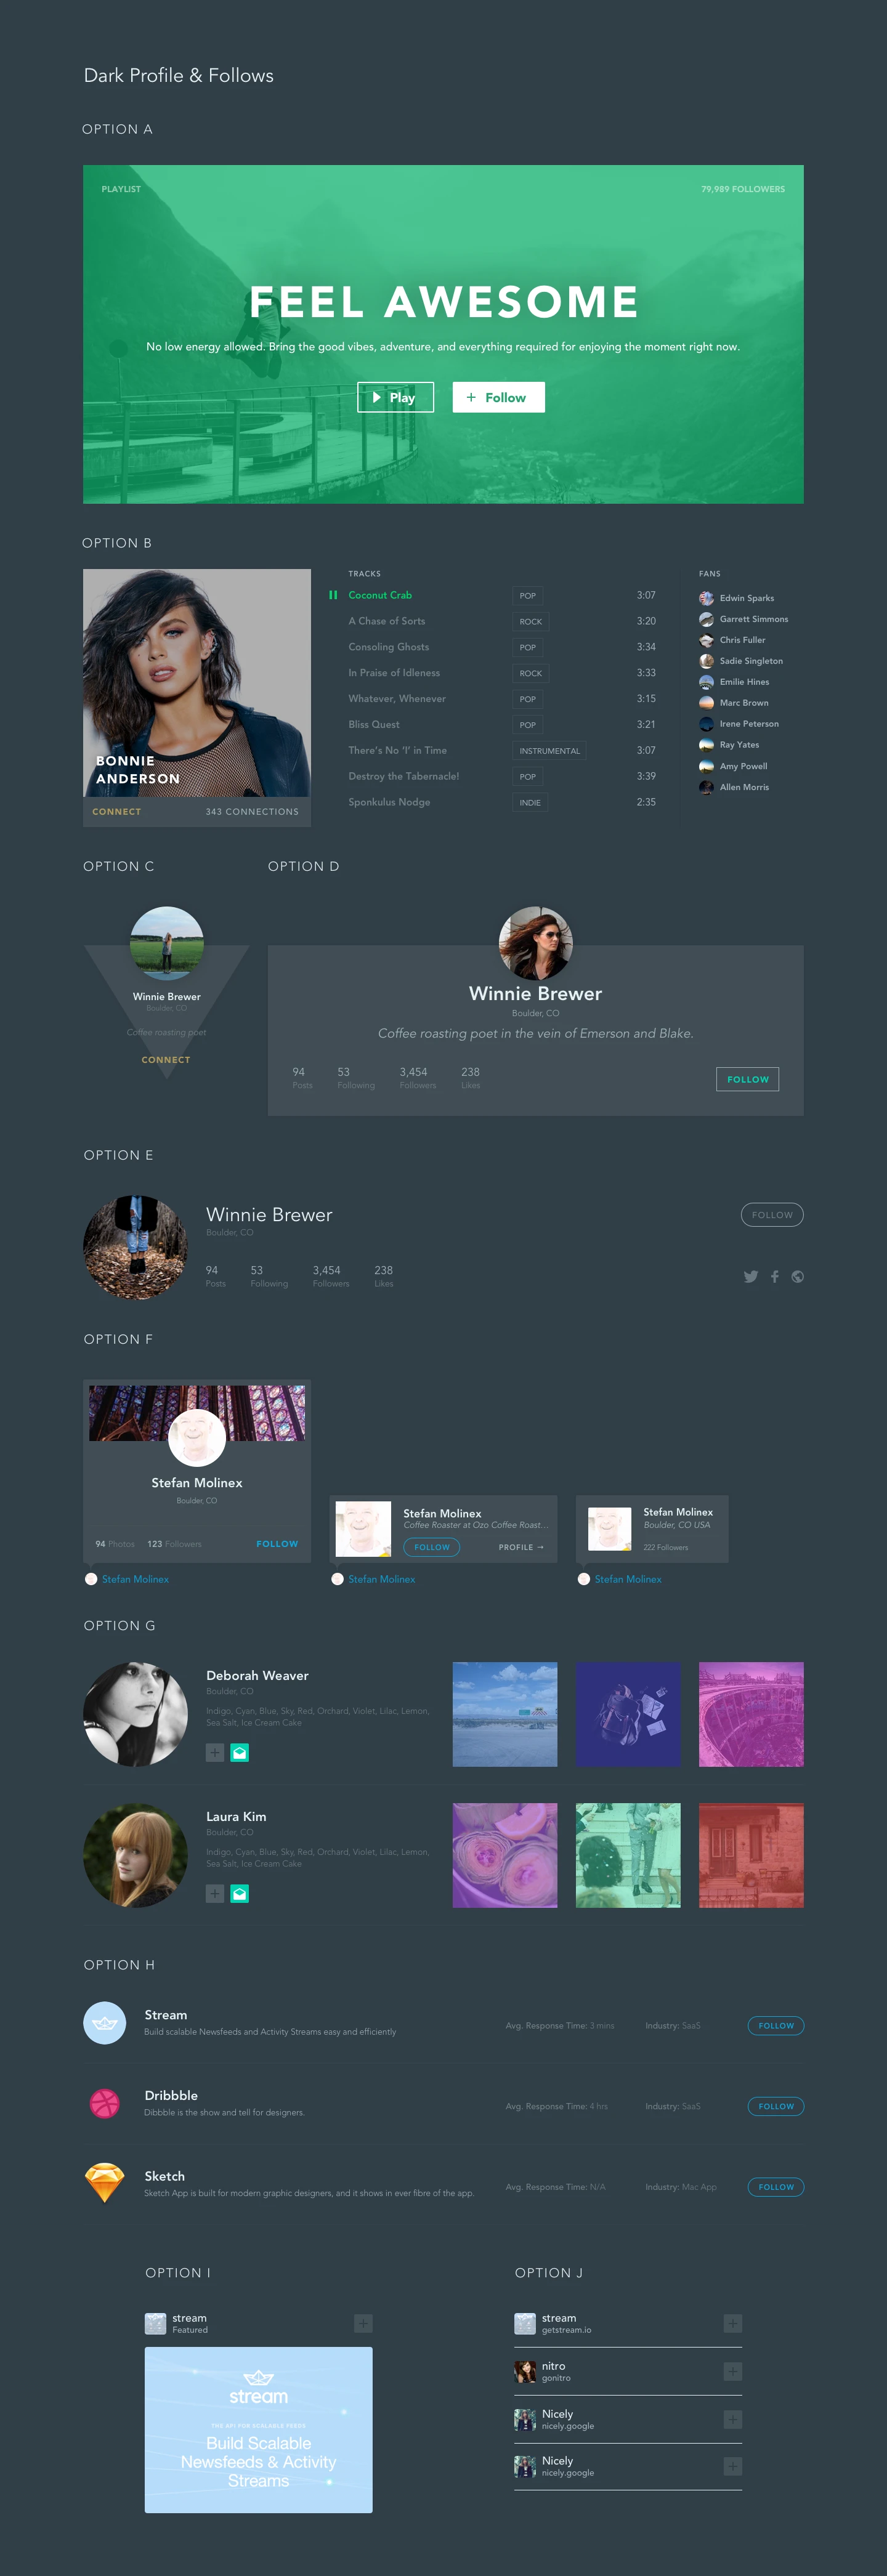 Based Feed UI Kit for Sketch - A versatile and comprehensive Feed UI Kit for Sketch. If you’re looking to jumpstart your design with notifications and social feeds, this is the way to do it. Whether you want to build a feed like Twitter, Instagram, Spotify or Facebook's we have you covered with this UI Kit. We implemented designs that are minimalistic and ready to be easily customized.